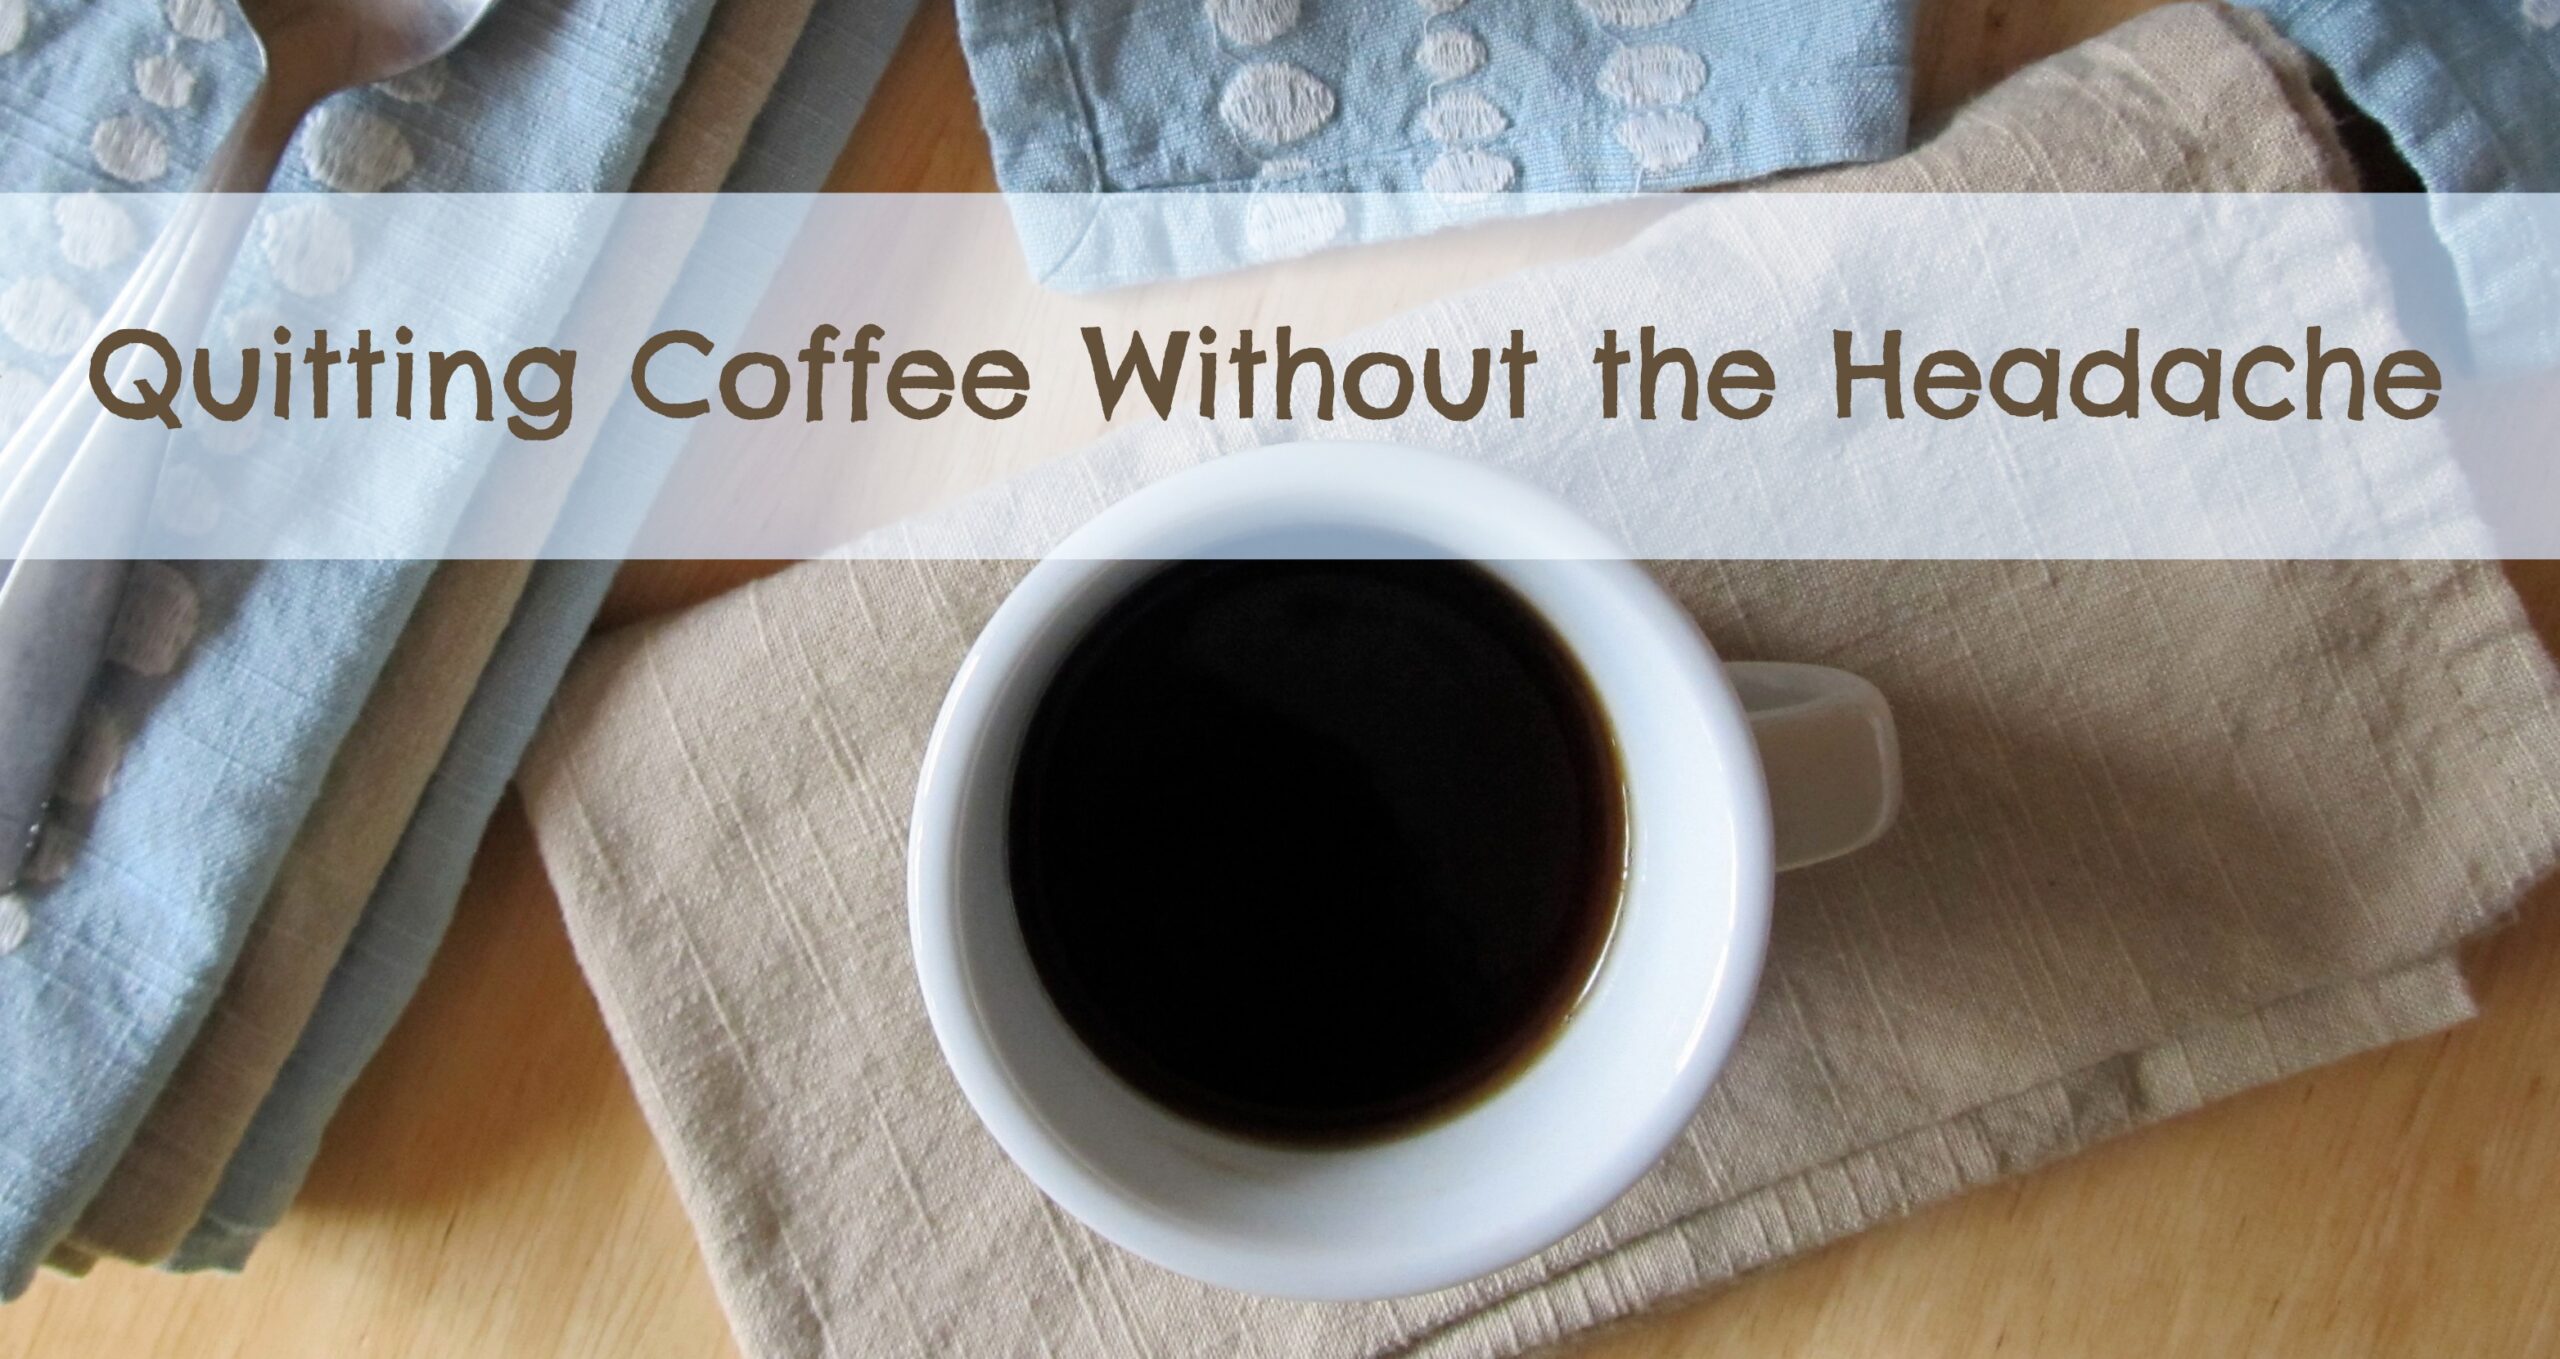 6 Tips for Quitting Coffee Without the Withdrawal Headache